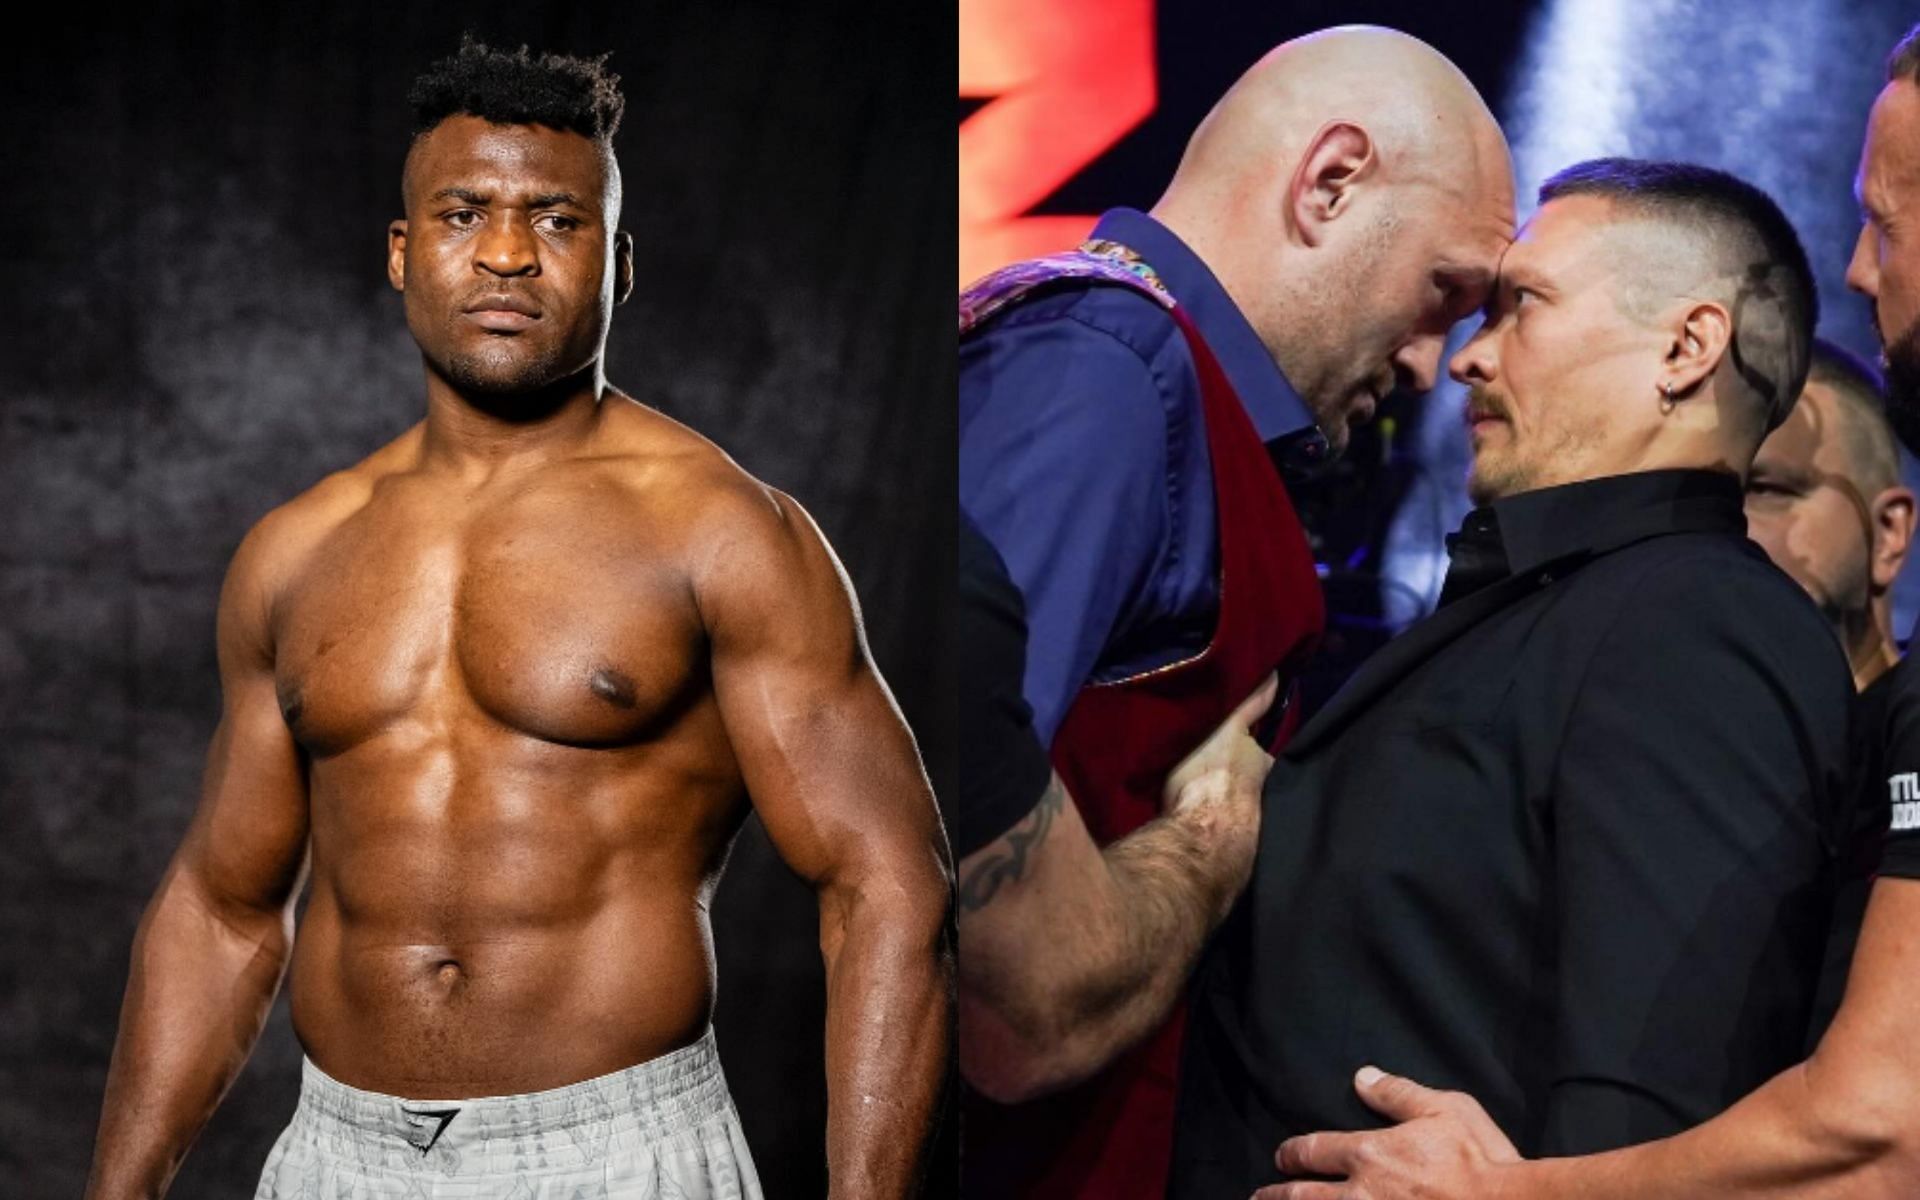 Francis Ngannou has weighed in on Tyson Fury vs. Oleksandr Usyk. [Images via @FrancisNgannou and @TysonFury on Instagram]